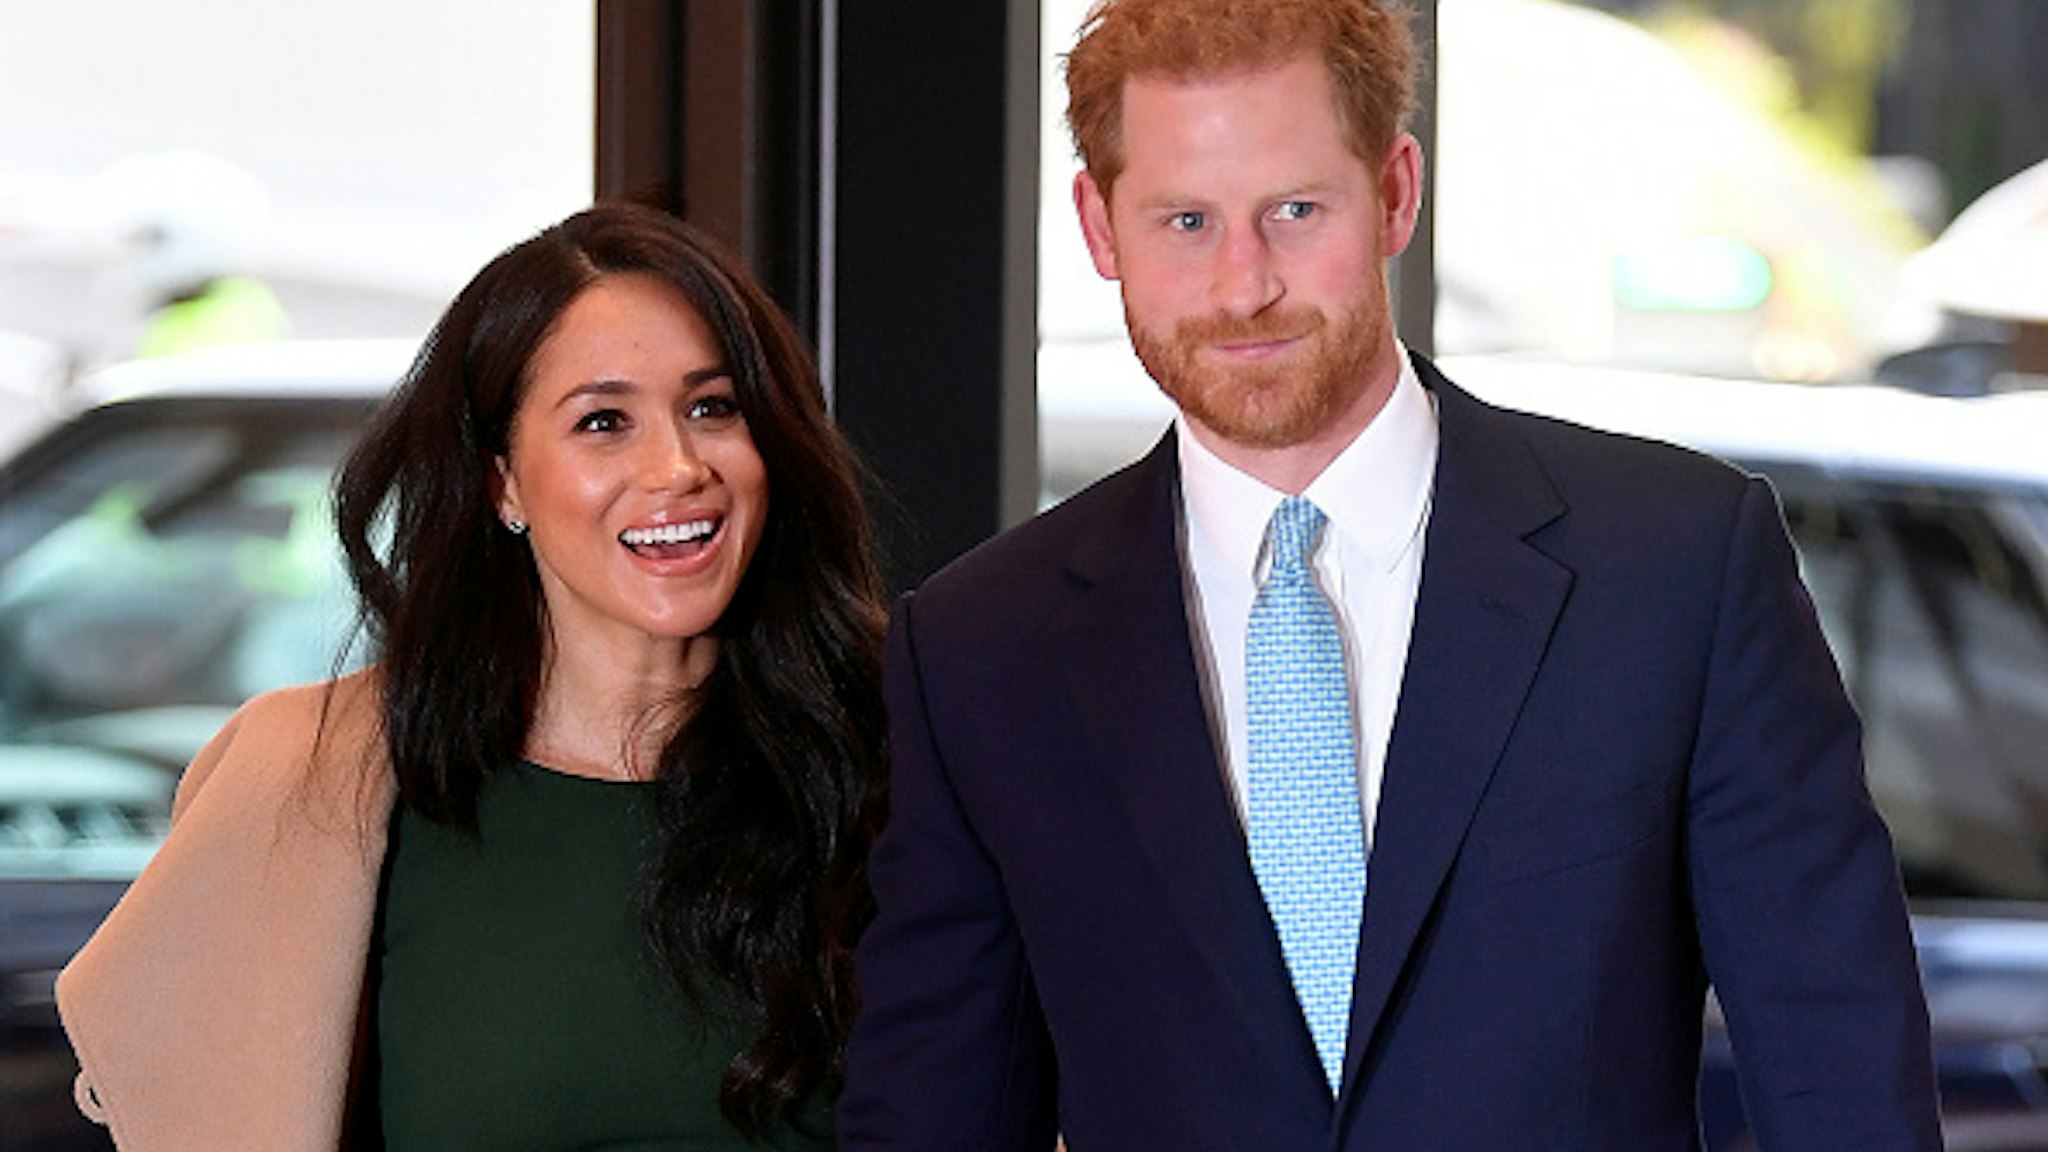 Britain's Prince Harry, Duke of Sussex (R), and his wife Meghan, Duchess of Sussex attend the annual WellChild Awards in London on October 15, 2019. - WellChild is the national charity for seriously ill children and their families. The WellChild Awards celebrate the inspiring qualities of some of the country's seriously ill young people and the dedication of those who care for and support them.